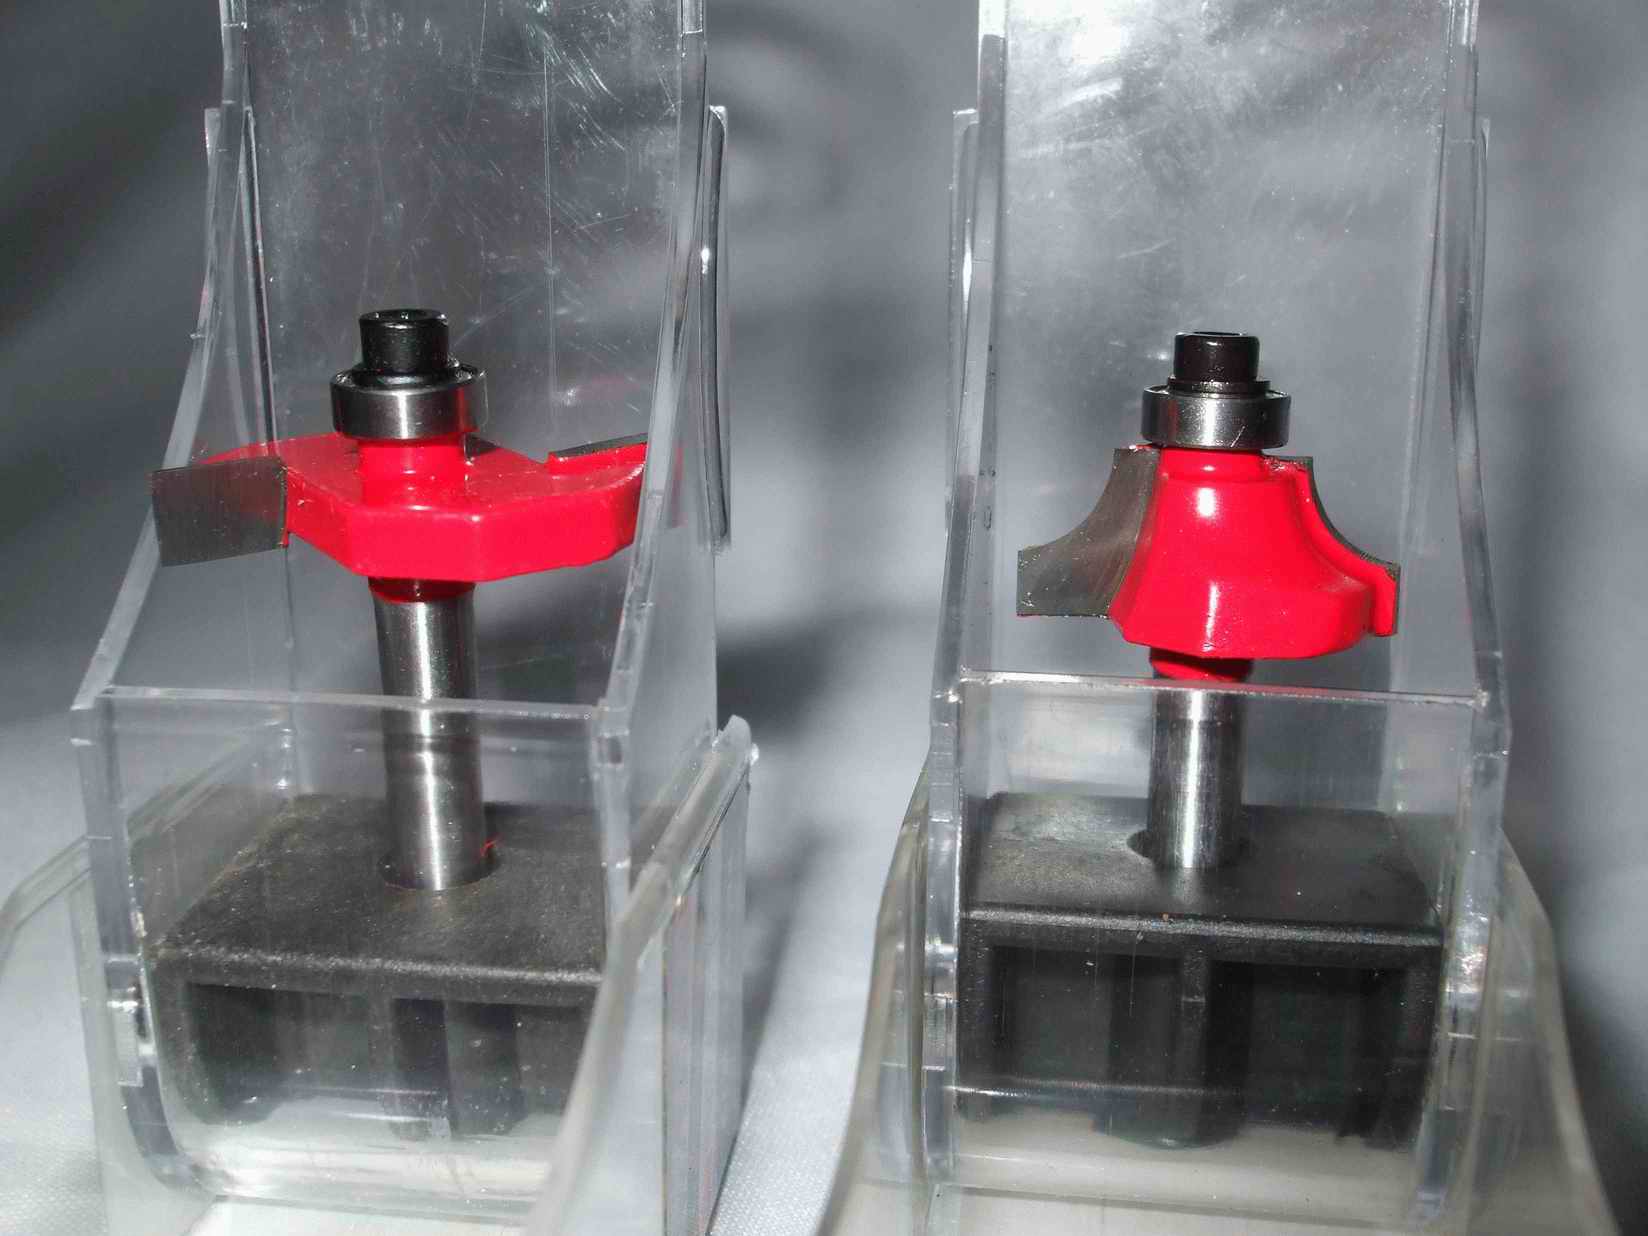  rob carbide router bits, yeyi rob carbide router bits From Supplier